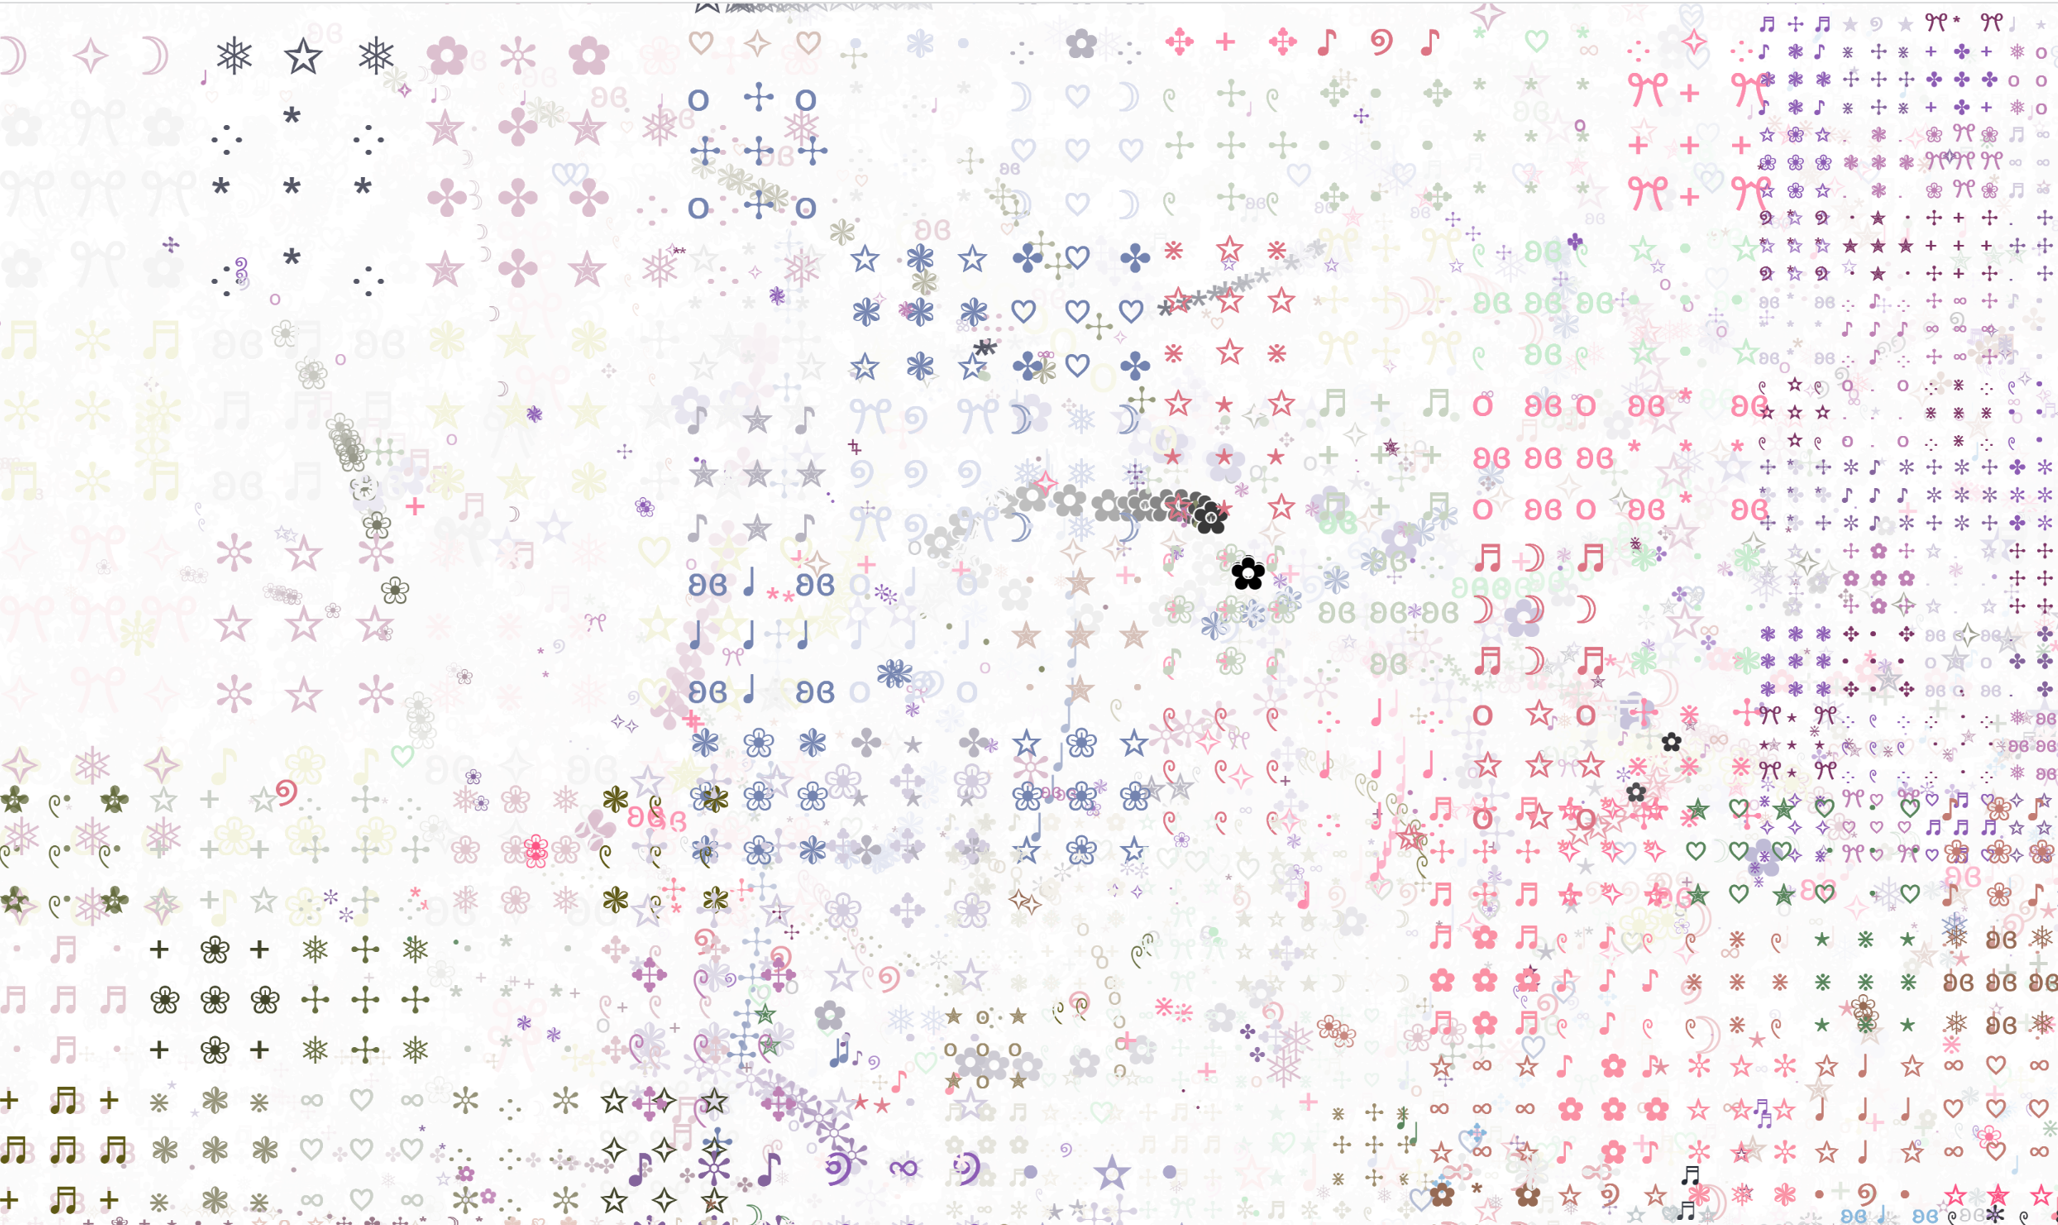 A capture of an interactive website covered with glyphs and symbols in regular patterns; an arc of flowers with gradient intensity shows how the movement of the user's cursor affects the content of the site